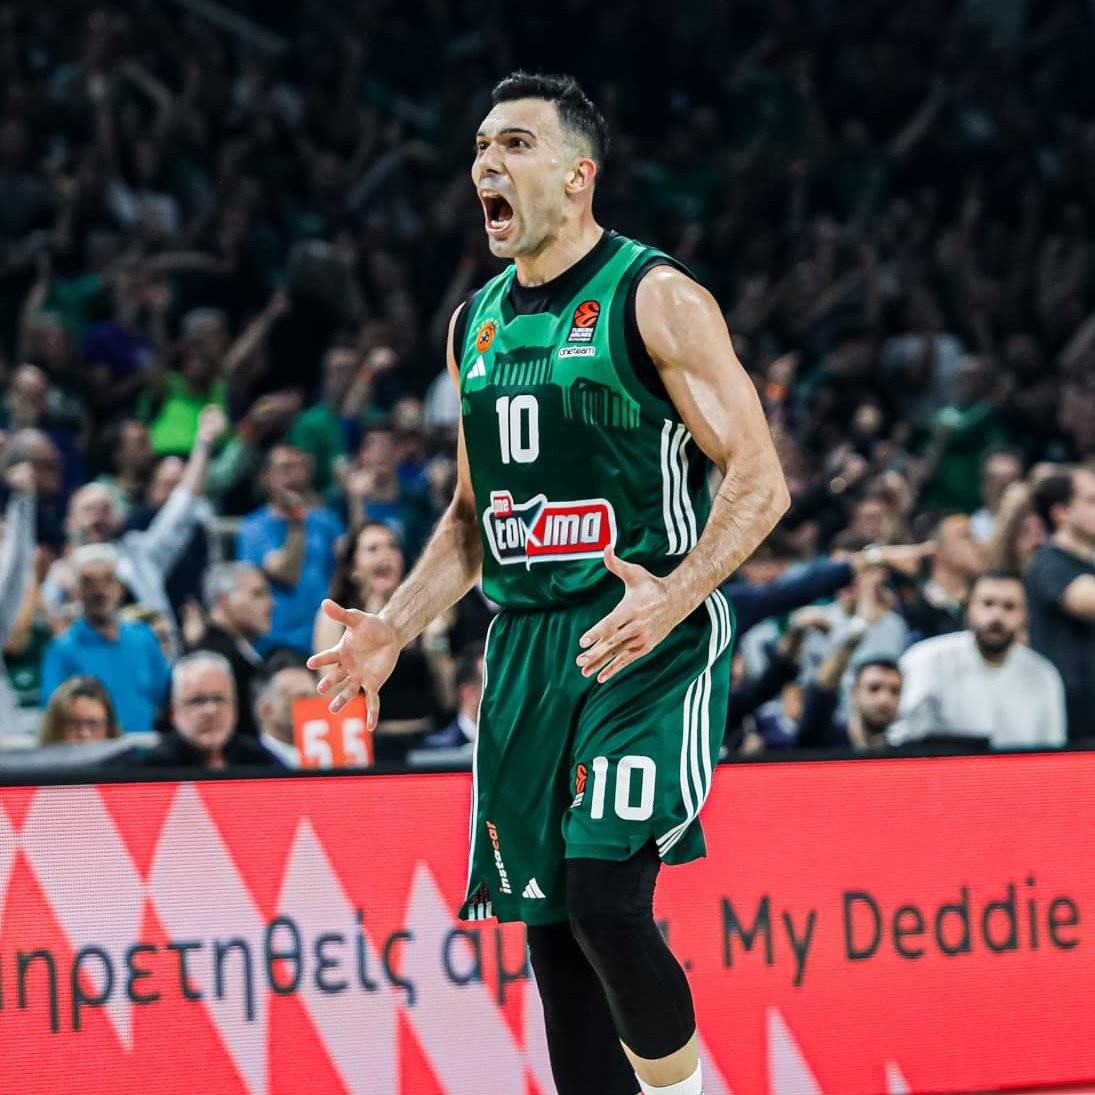 Ergin Ataman delivered a tactical master class as Panathinaikos claimed the Euroleague title with victory over Chus Mateo's Real Madrid